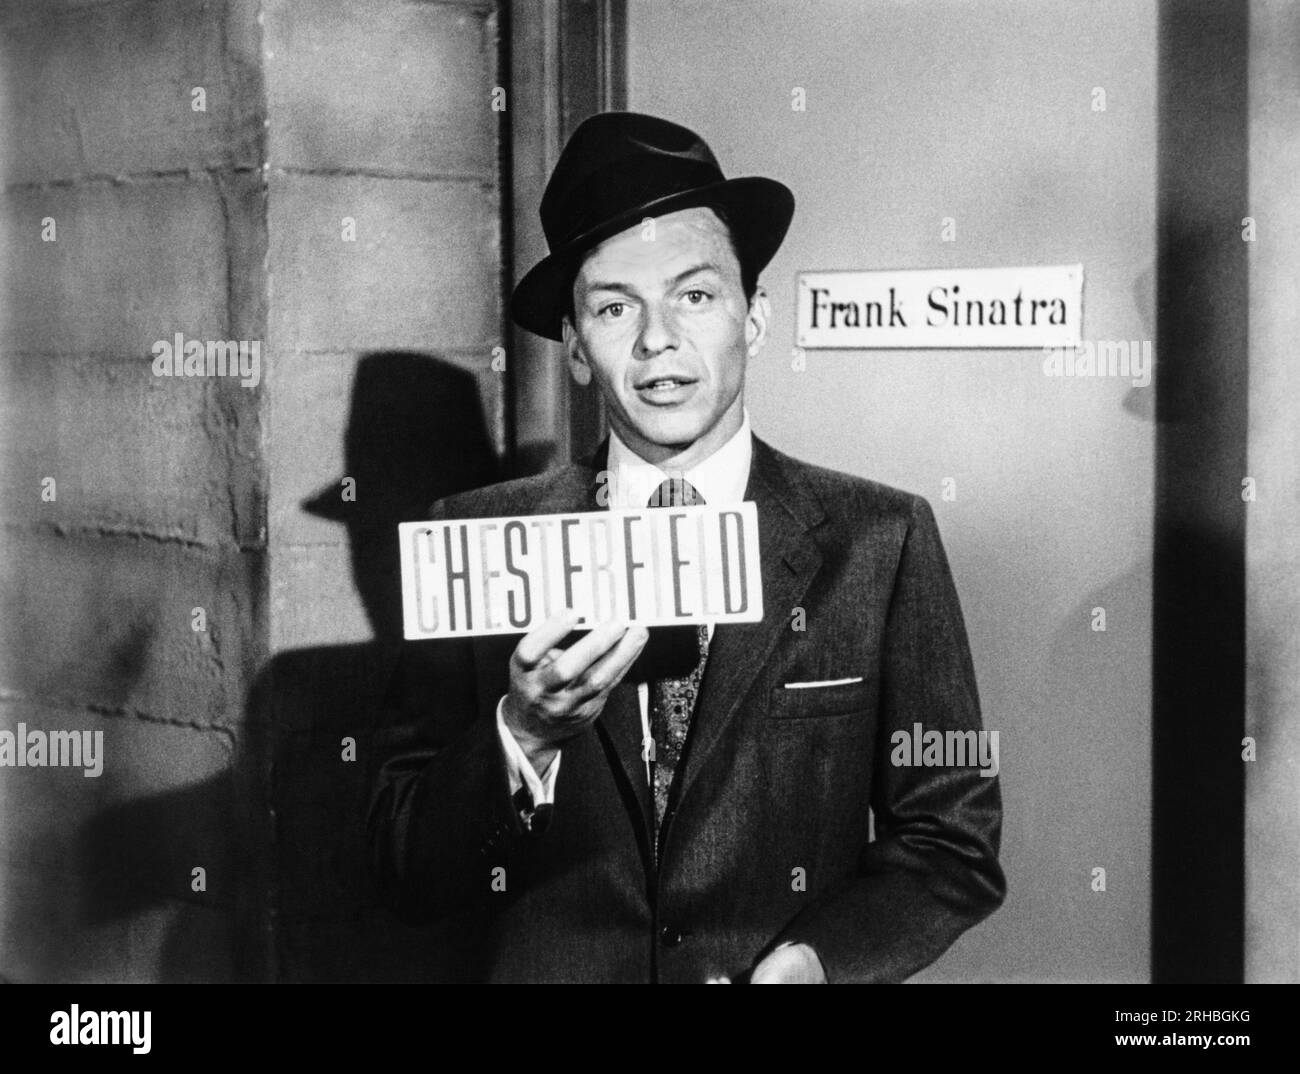 United States:  c. 1957 Frank Sinatra holding a sign for Chesterfield cigarettes. The Frank Sinatra Show was sponsored by them. Stock Photo